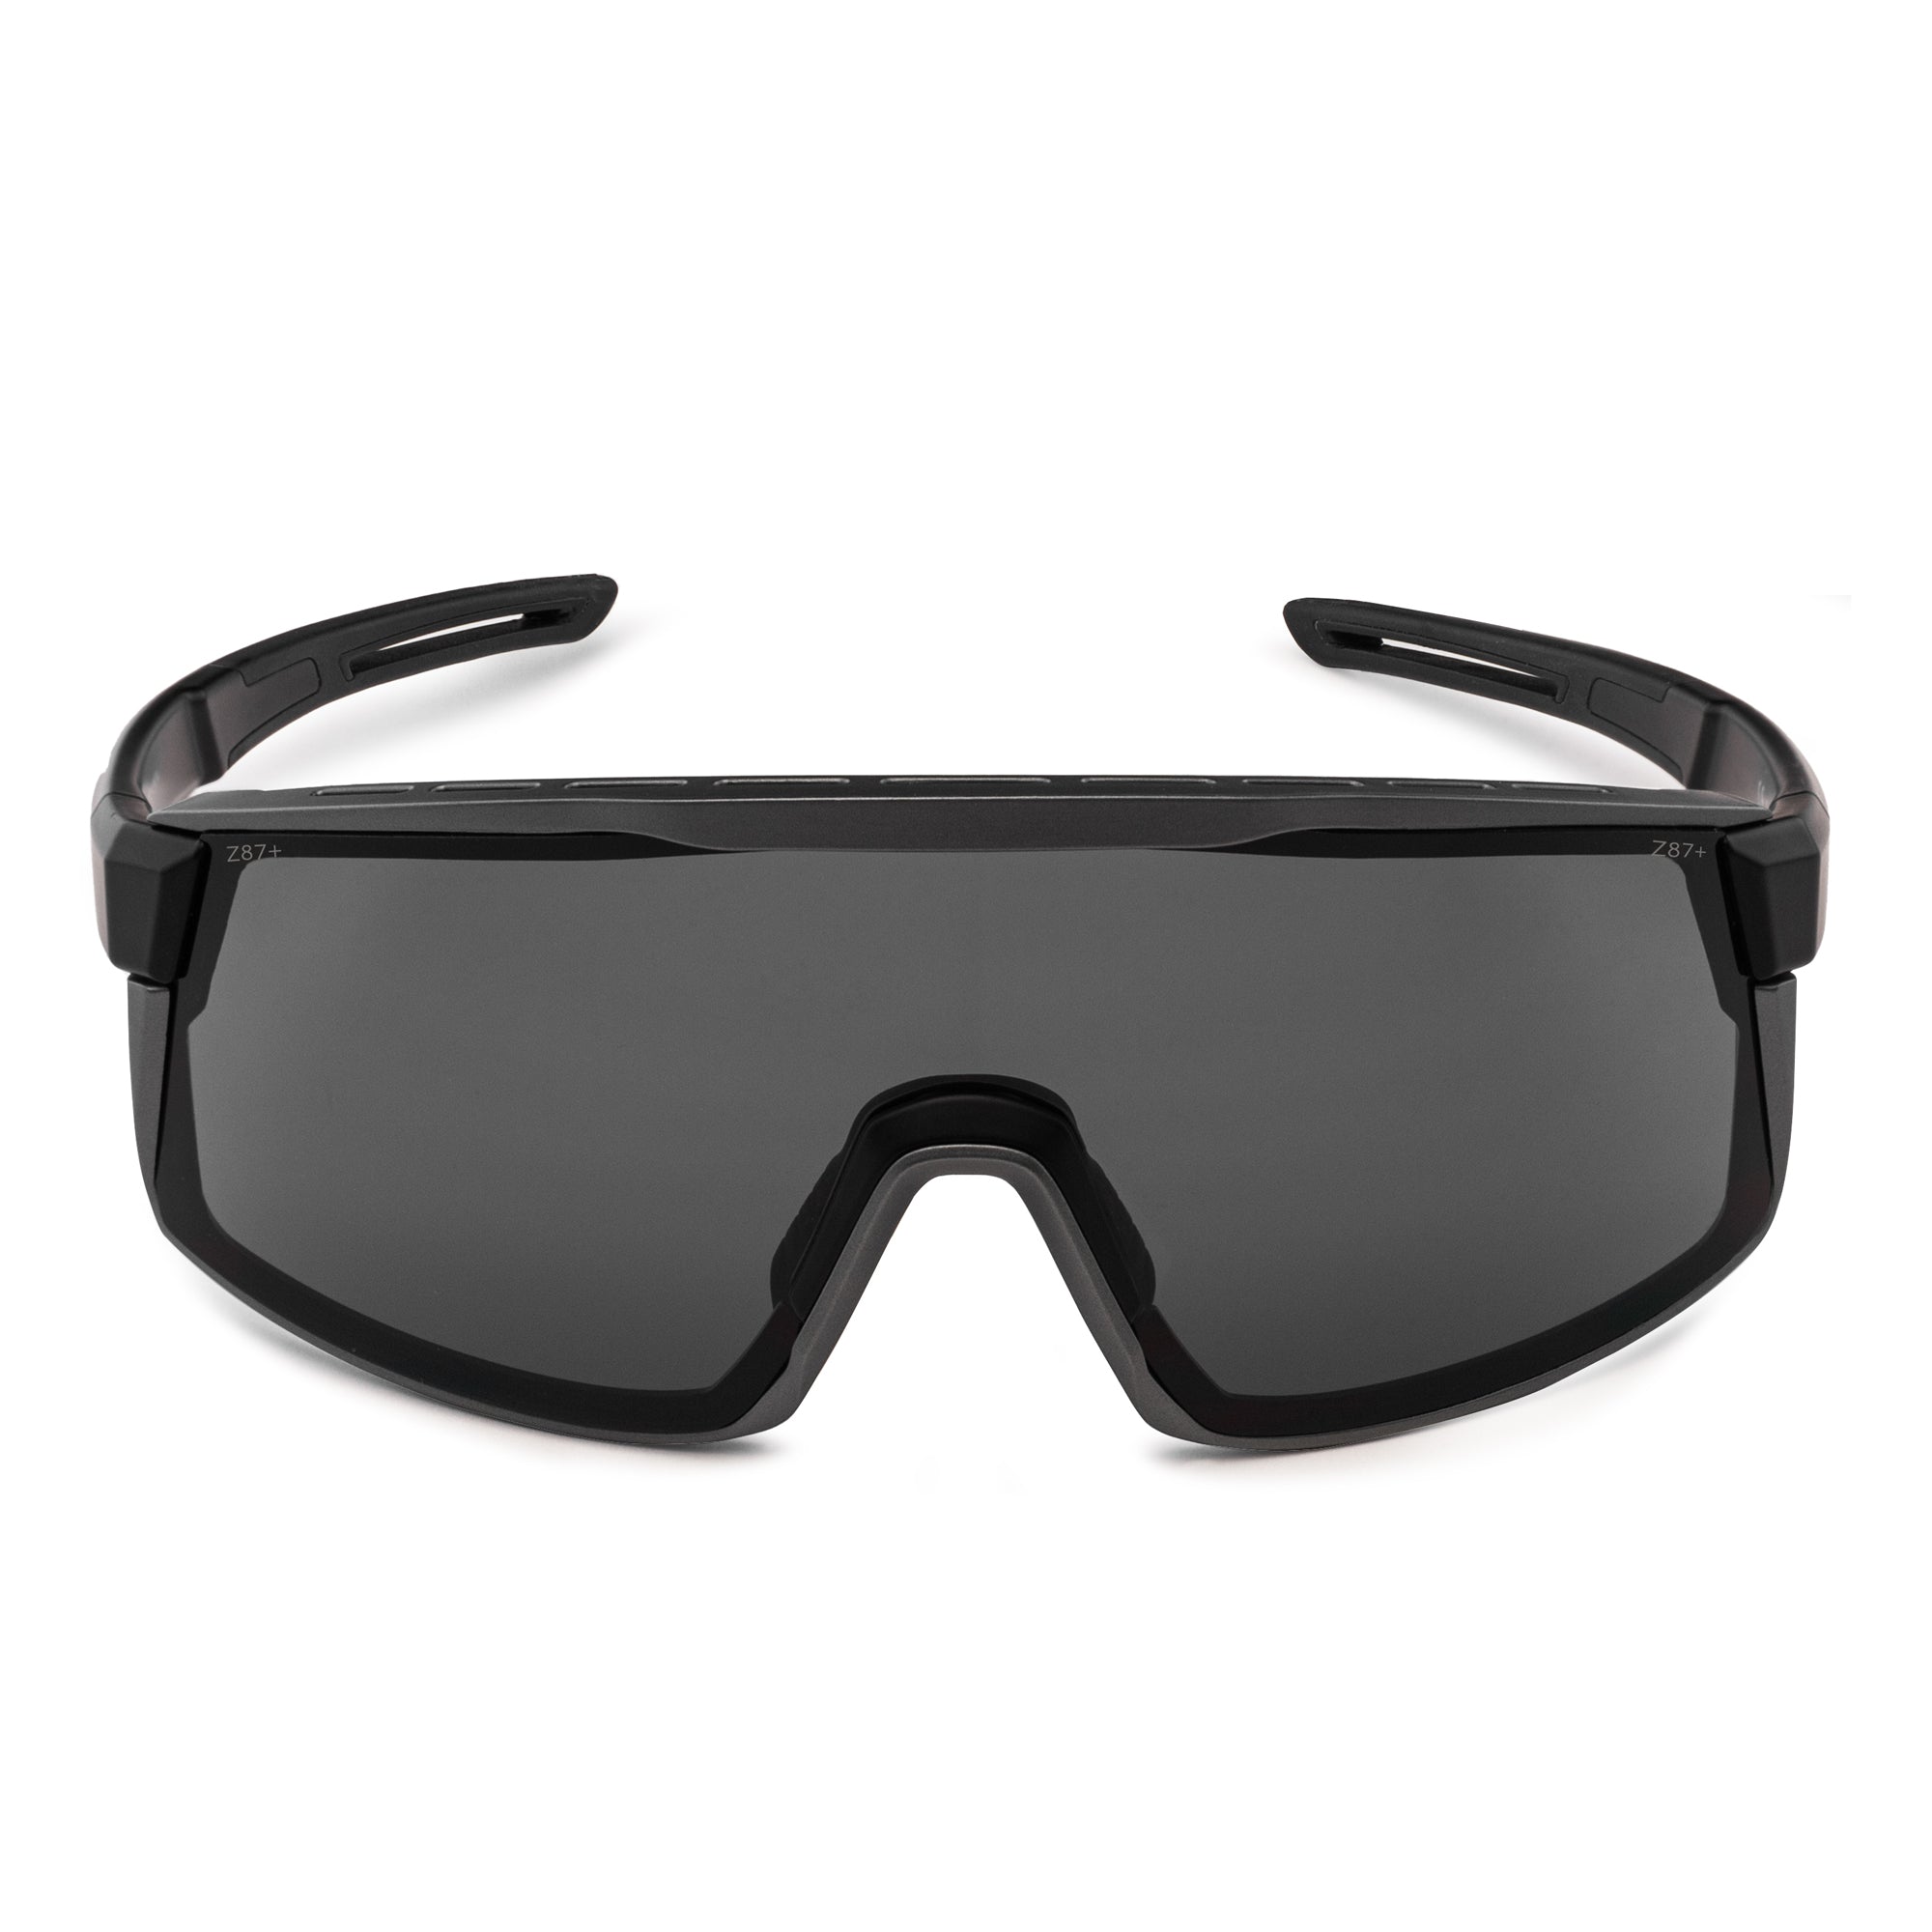 The Sentinel Safety Glasses